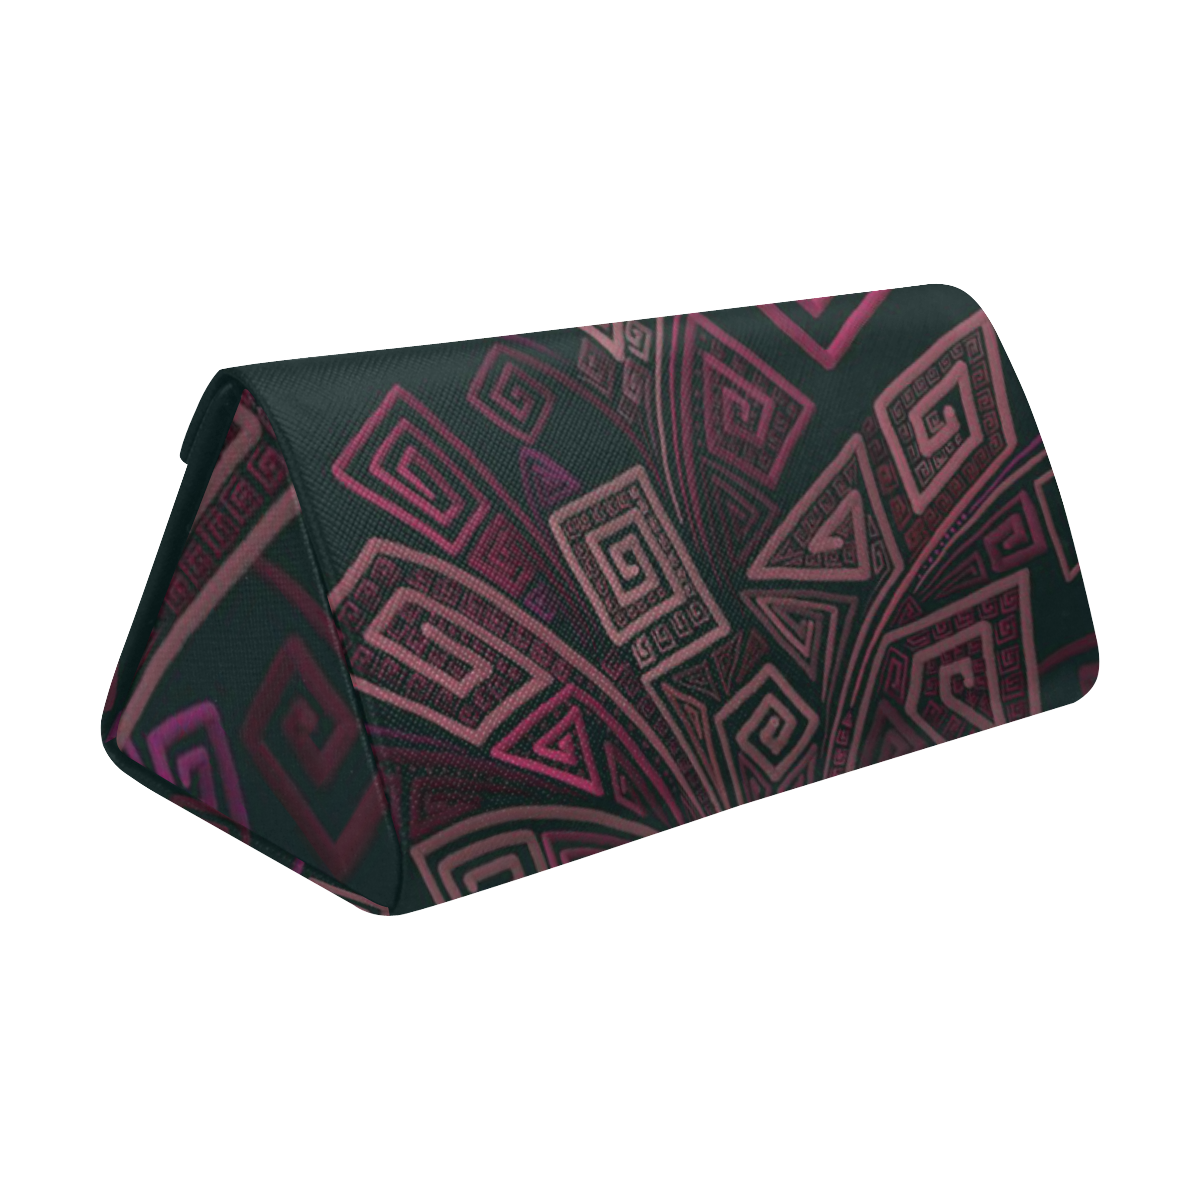 Psychedelic 3D Square Spirals - pink and orange Custom Foldable Glasses Case